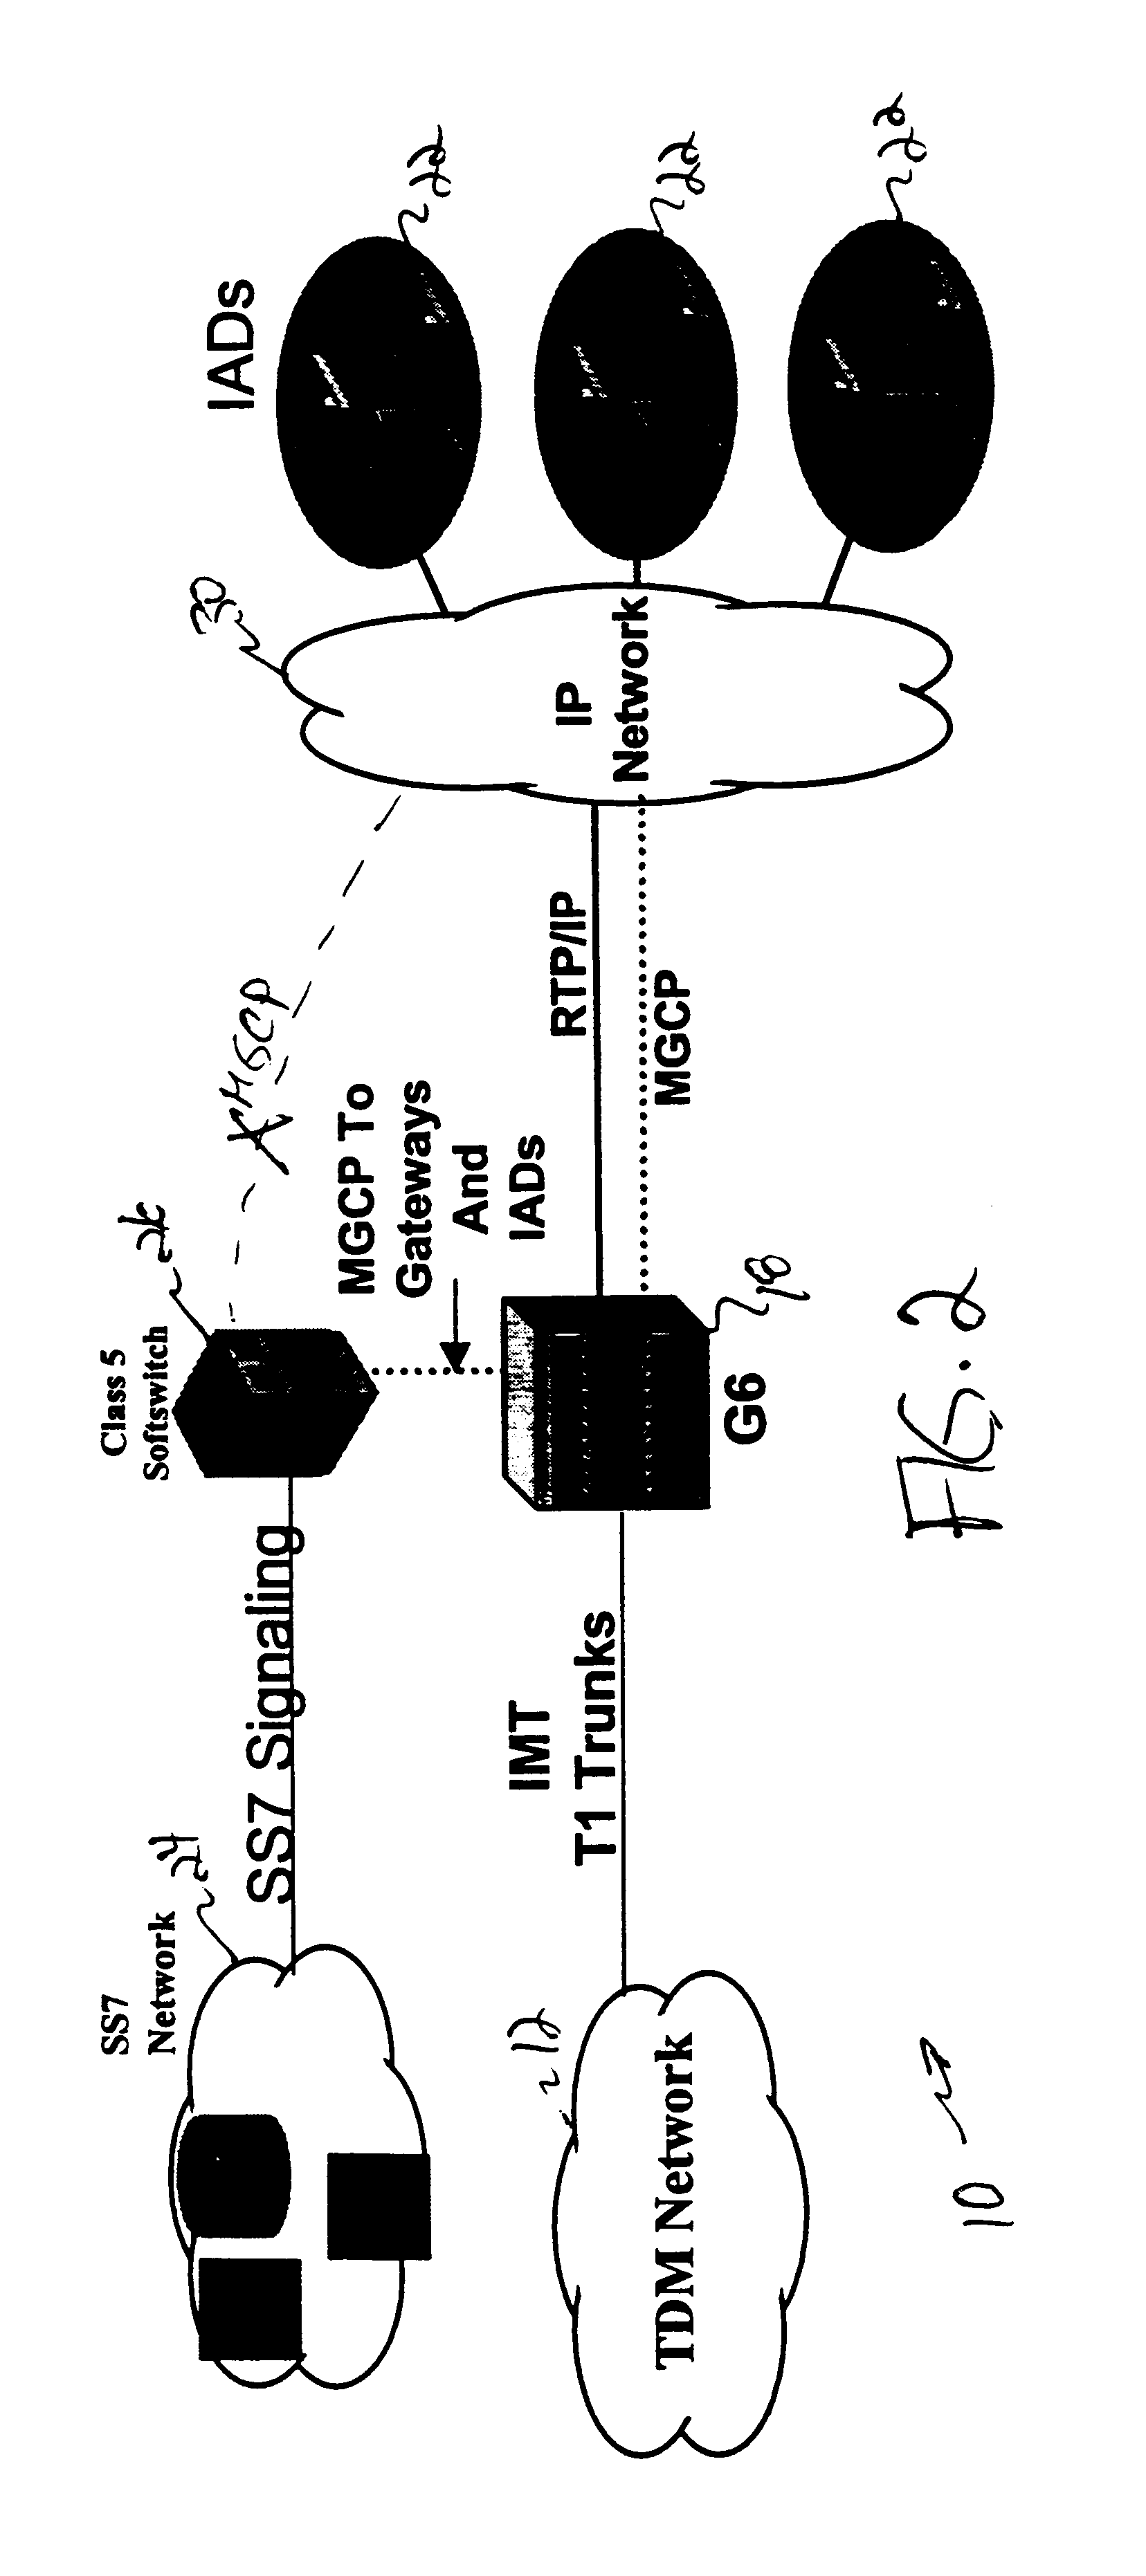 System and method for interfacing signaling information and voice traffic